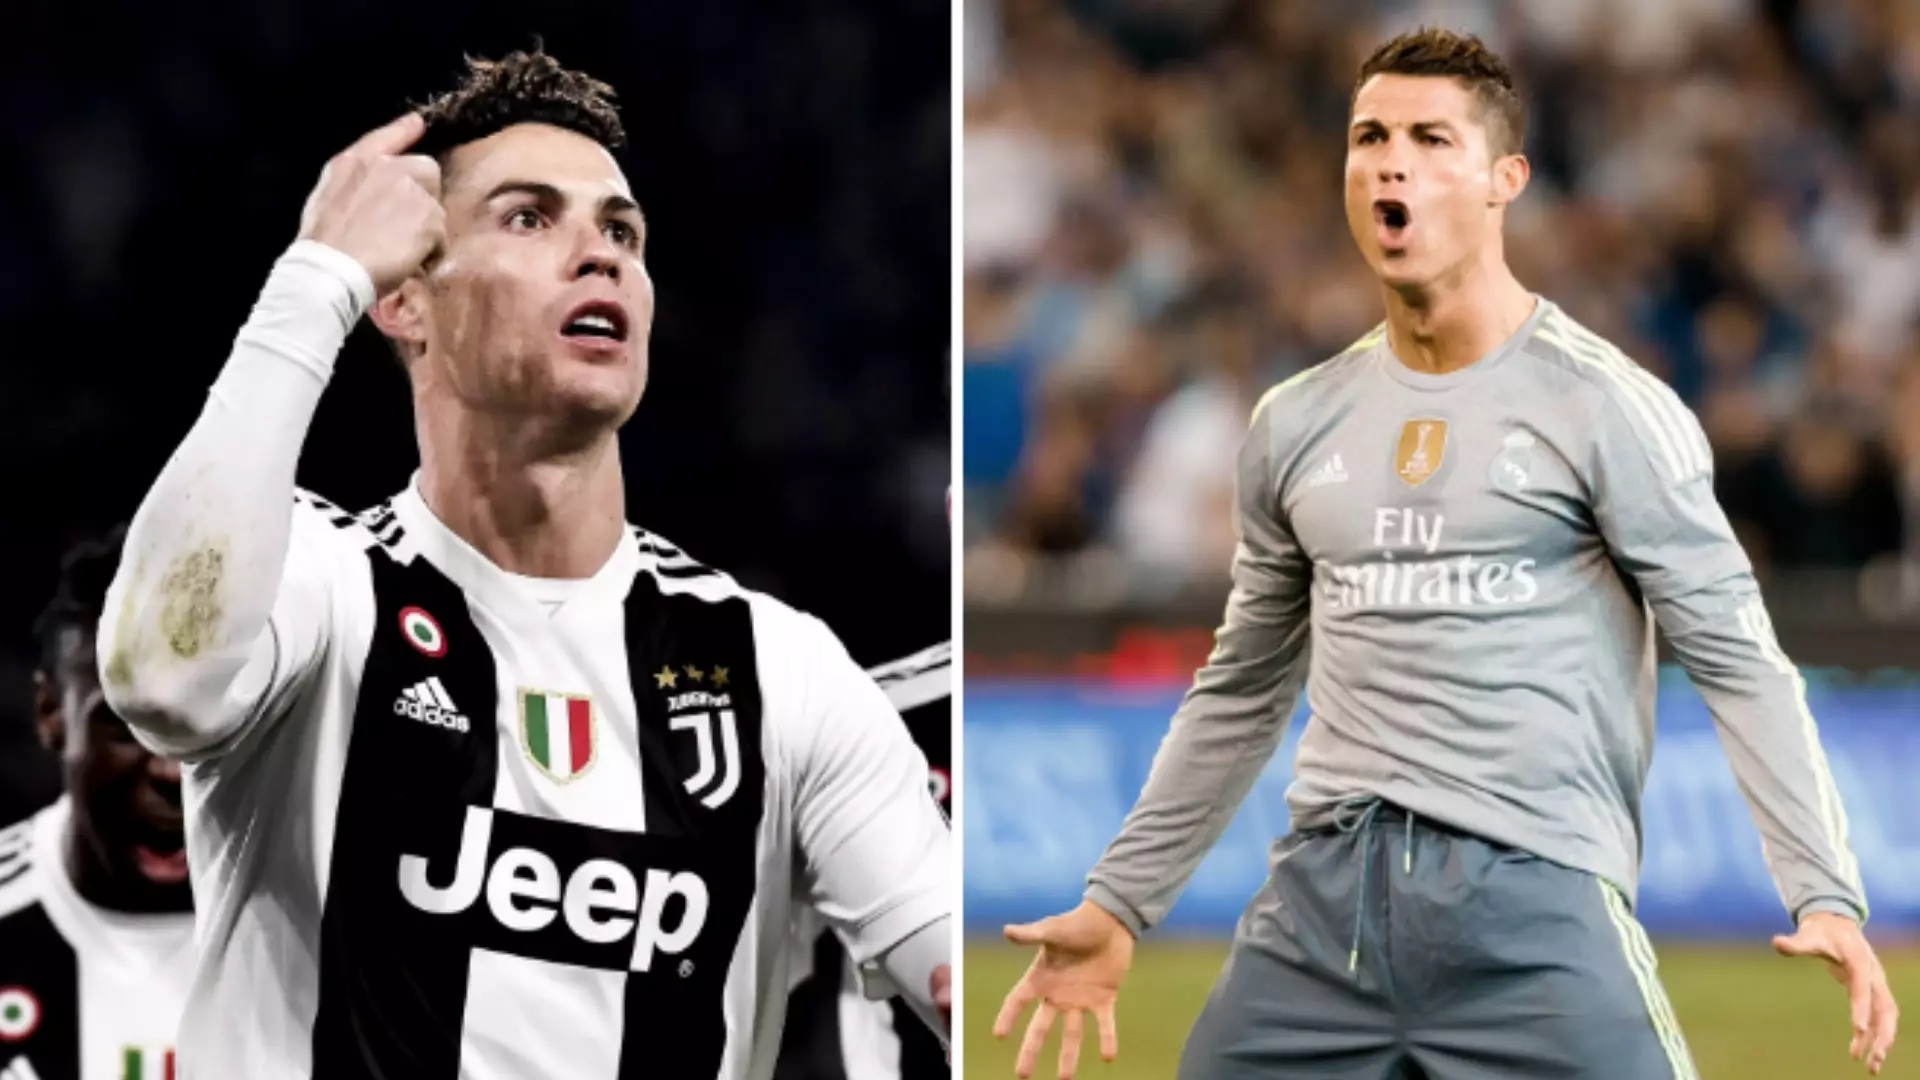 Cristiano Ronaldo Opens Up About His Trademark ‘Sii’ Celebration